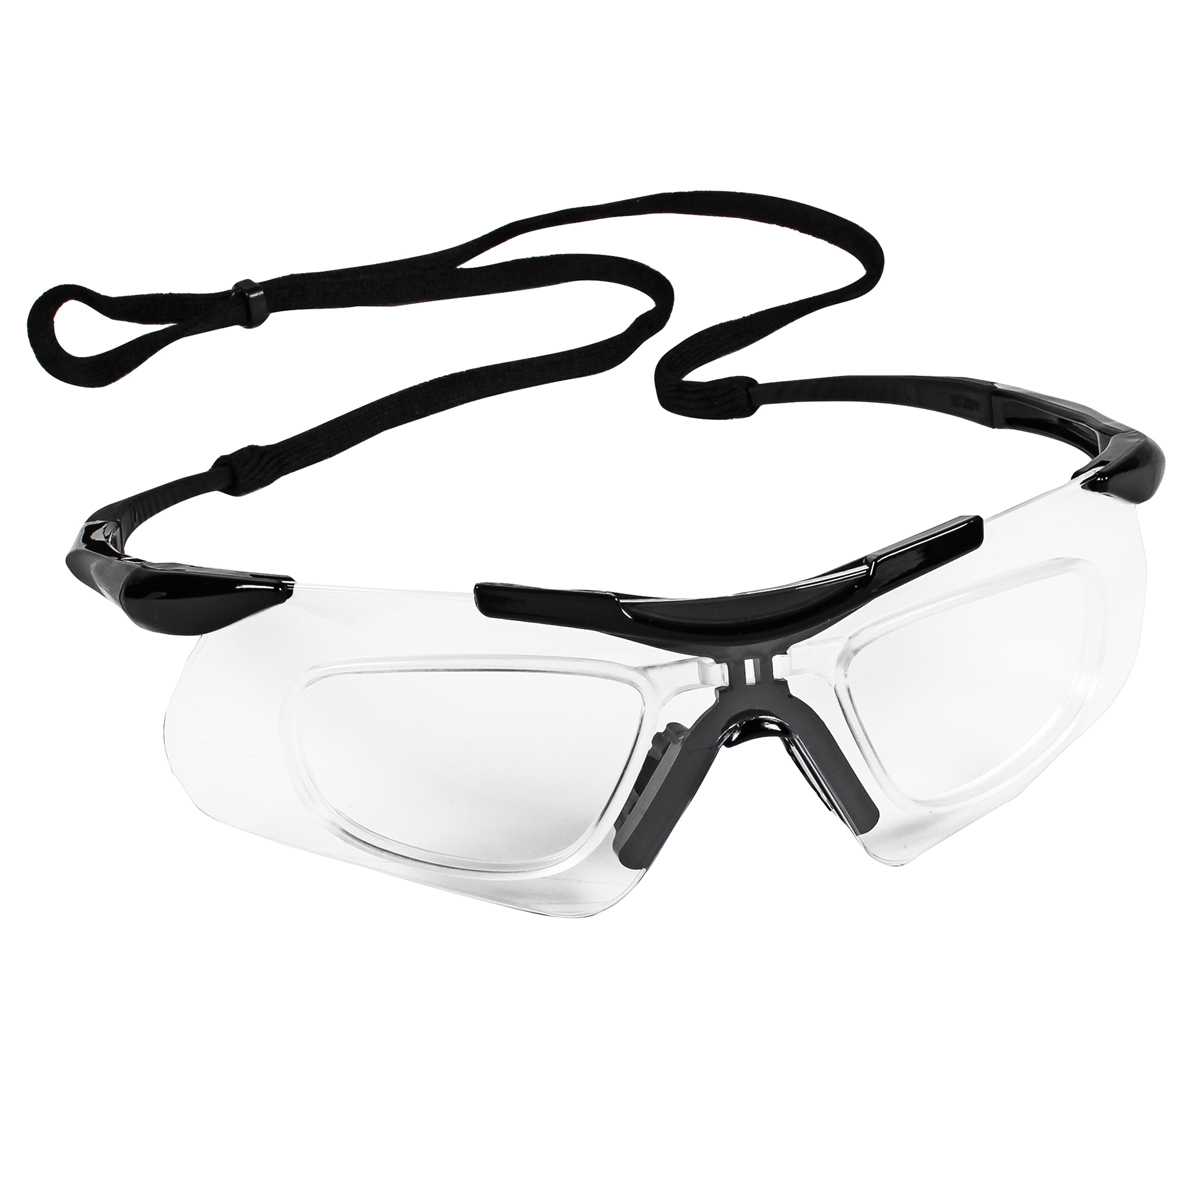 Kimberly-Clark Professional* KleenGuard™ Nemesis* Black Safety Glasses With Clear Anti-Fog/Hard Coat Lens And Rx Prescription In